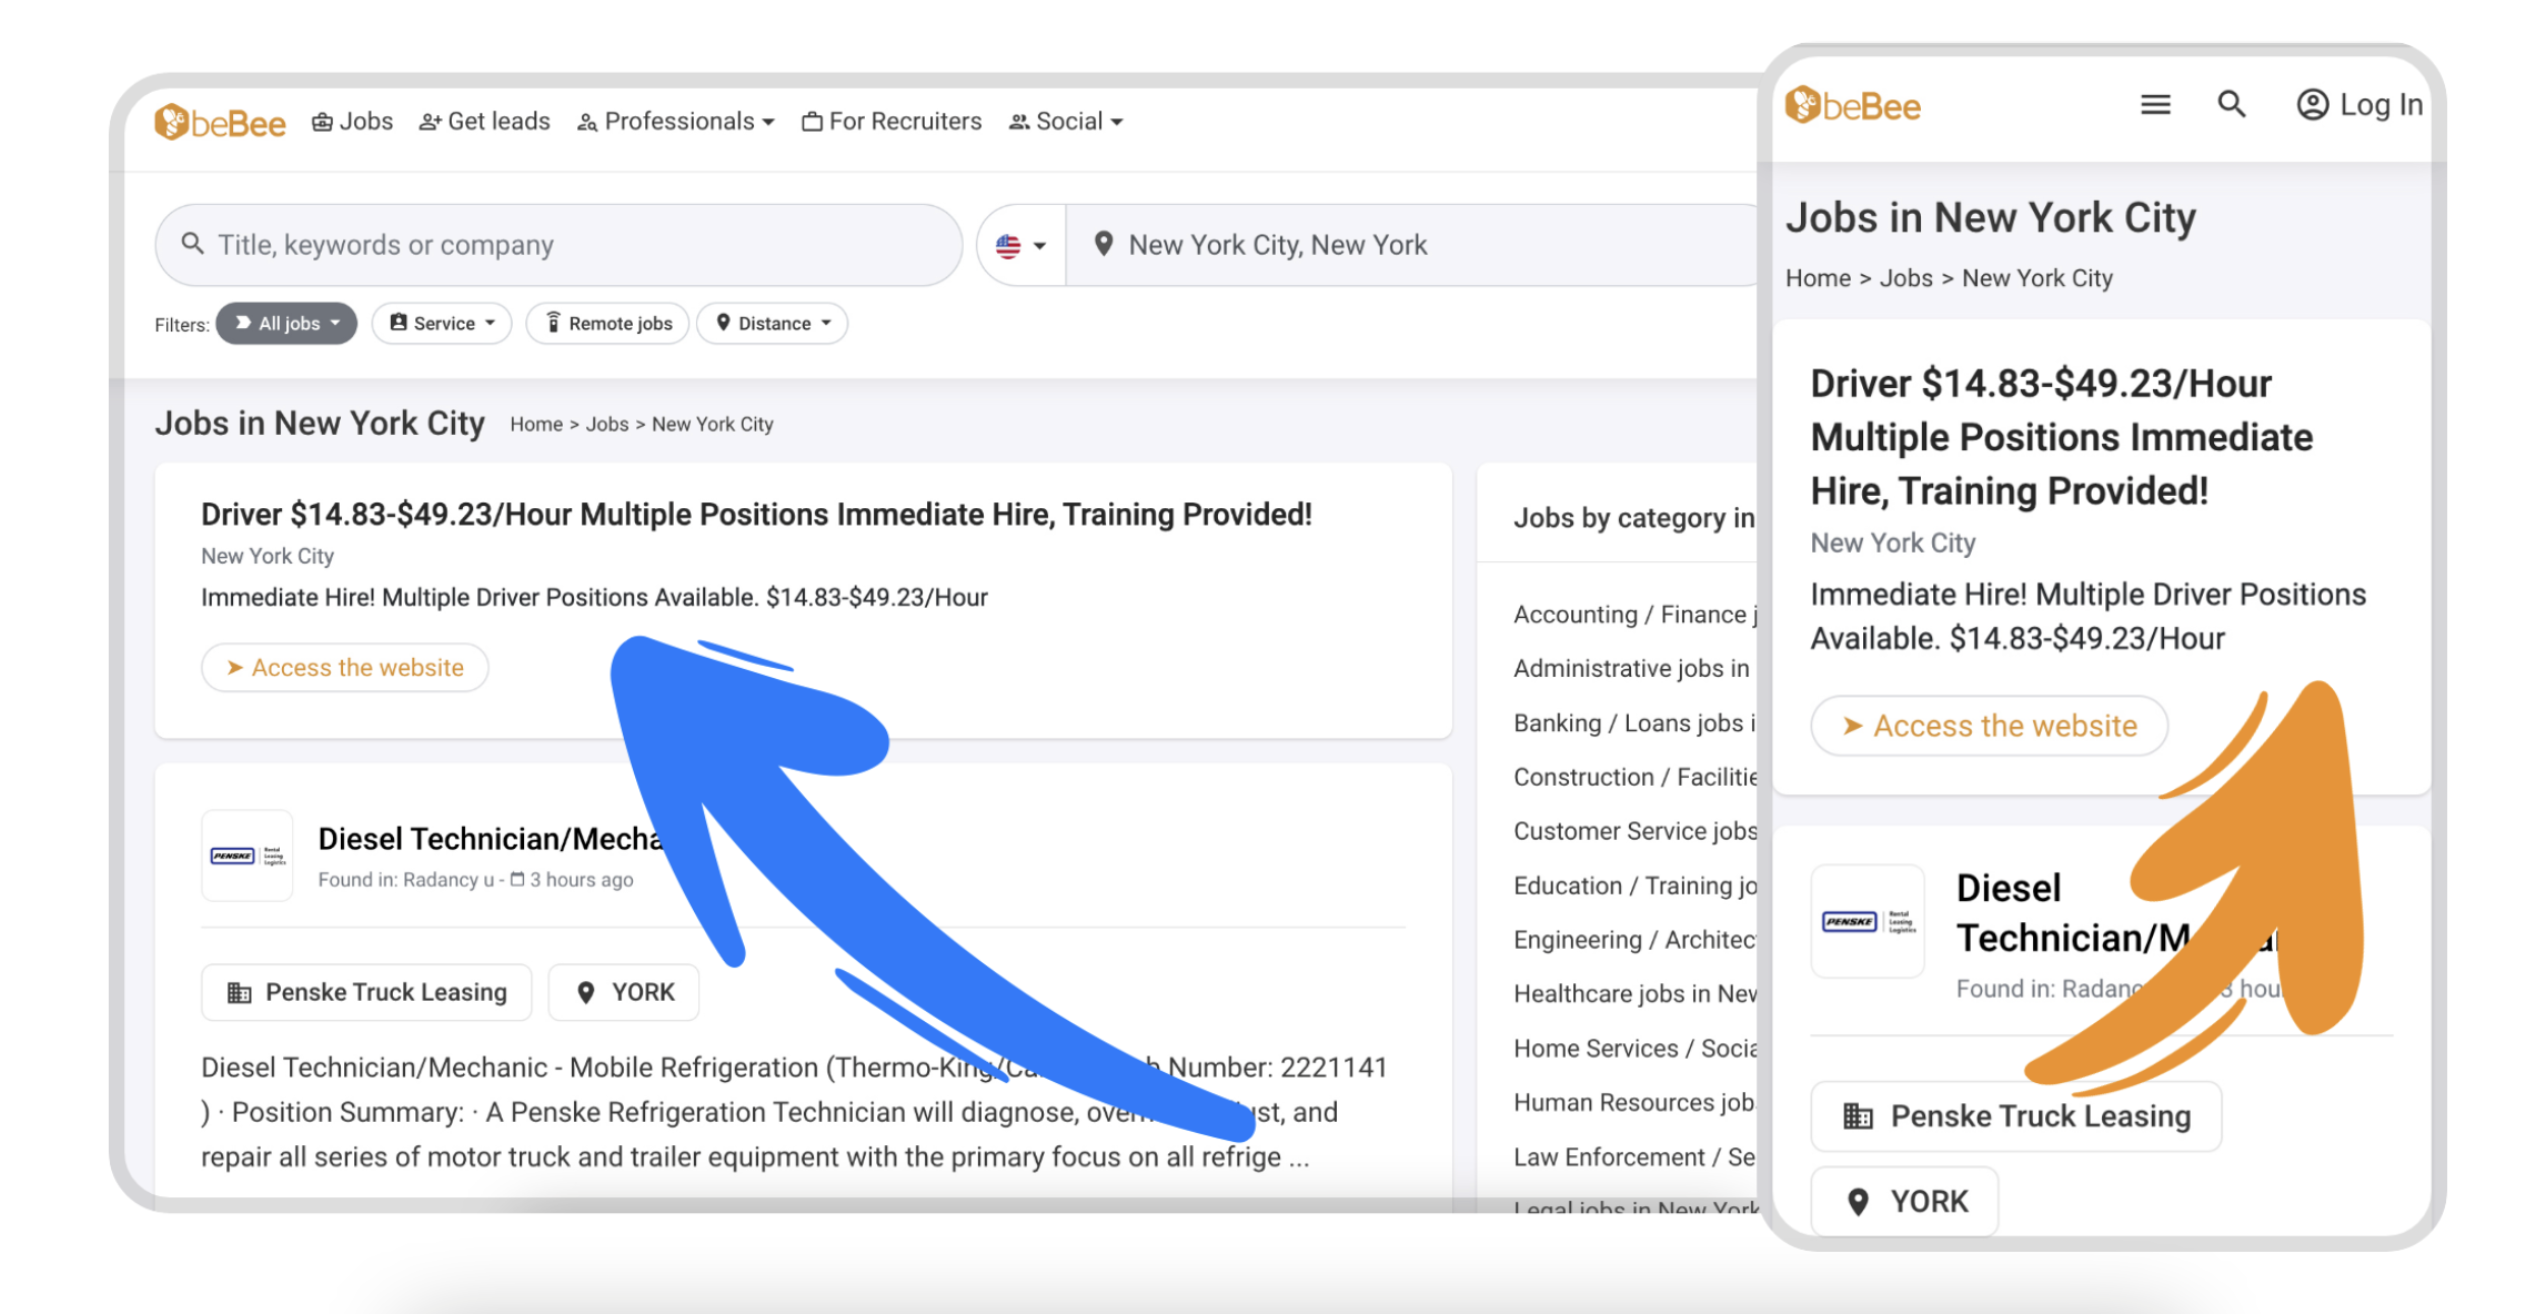 ©beBee @ Jobs &*Getleads 2 Professionals» (For Recruiters 2 Social ~

Q Title, keywords or company « + Q New York City, New York
Filters aD A service ~ 7 Remotejobs ~~ © Distance +
Jobs in New York City Home > Jobs > New York City

Driver $14.83-$49.23/Hour Multiple Positions Immediate Hire, Training Provided!
New York City
Immediate Hire! Multiple Driver Positions Available. $14.83-$49.23/Hour

  
  
  
   
 

» Access the website

Diesel Technician/Mech

Found in: Radancy u - 8 3 hours ago

= =

BB Penske Truck Leasing Q YORK

Diesel Technician/Mechanic - Mobile Refrigeration (Thermo-| umber: 2221141
) - Position Summary: - A Penske Refrigeration Technician will diagnose, 0 st, and
repair all series of motor truck and trailer equipment with the primary focus on all refrige ...

Jobs by category in

Accounting / Finance |
Administrative jobs in
Banking / Loans jobs i
Construction / Facilitie
Customer Service jobs
Education / Training jo
Engineering / Architec
Healthcare jobs in Nev
Home Services / Socié
Human Resources job

Law Enforcement / Se

I anal inhe in Naw Varl

©beBee = Q Q@lLlogin

Jobs in New York City

Home > Jobs > New York City

Driver $14.83-$49.23/Hour
Multiple Positions Immediate
Hire, Training Provided!

New York City

Immediate Hire! Multiple Driver Positions
Available. $14.83-$49.23/Hour

  
    
   
 

» Access the website

Diesel

Found in: Rada

By Penske Truck Leasing

Q YORK